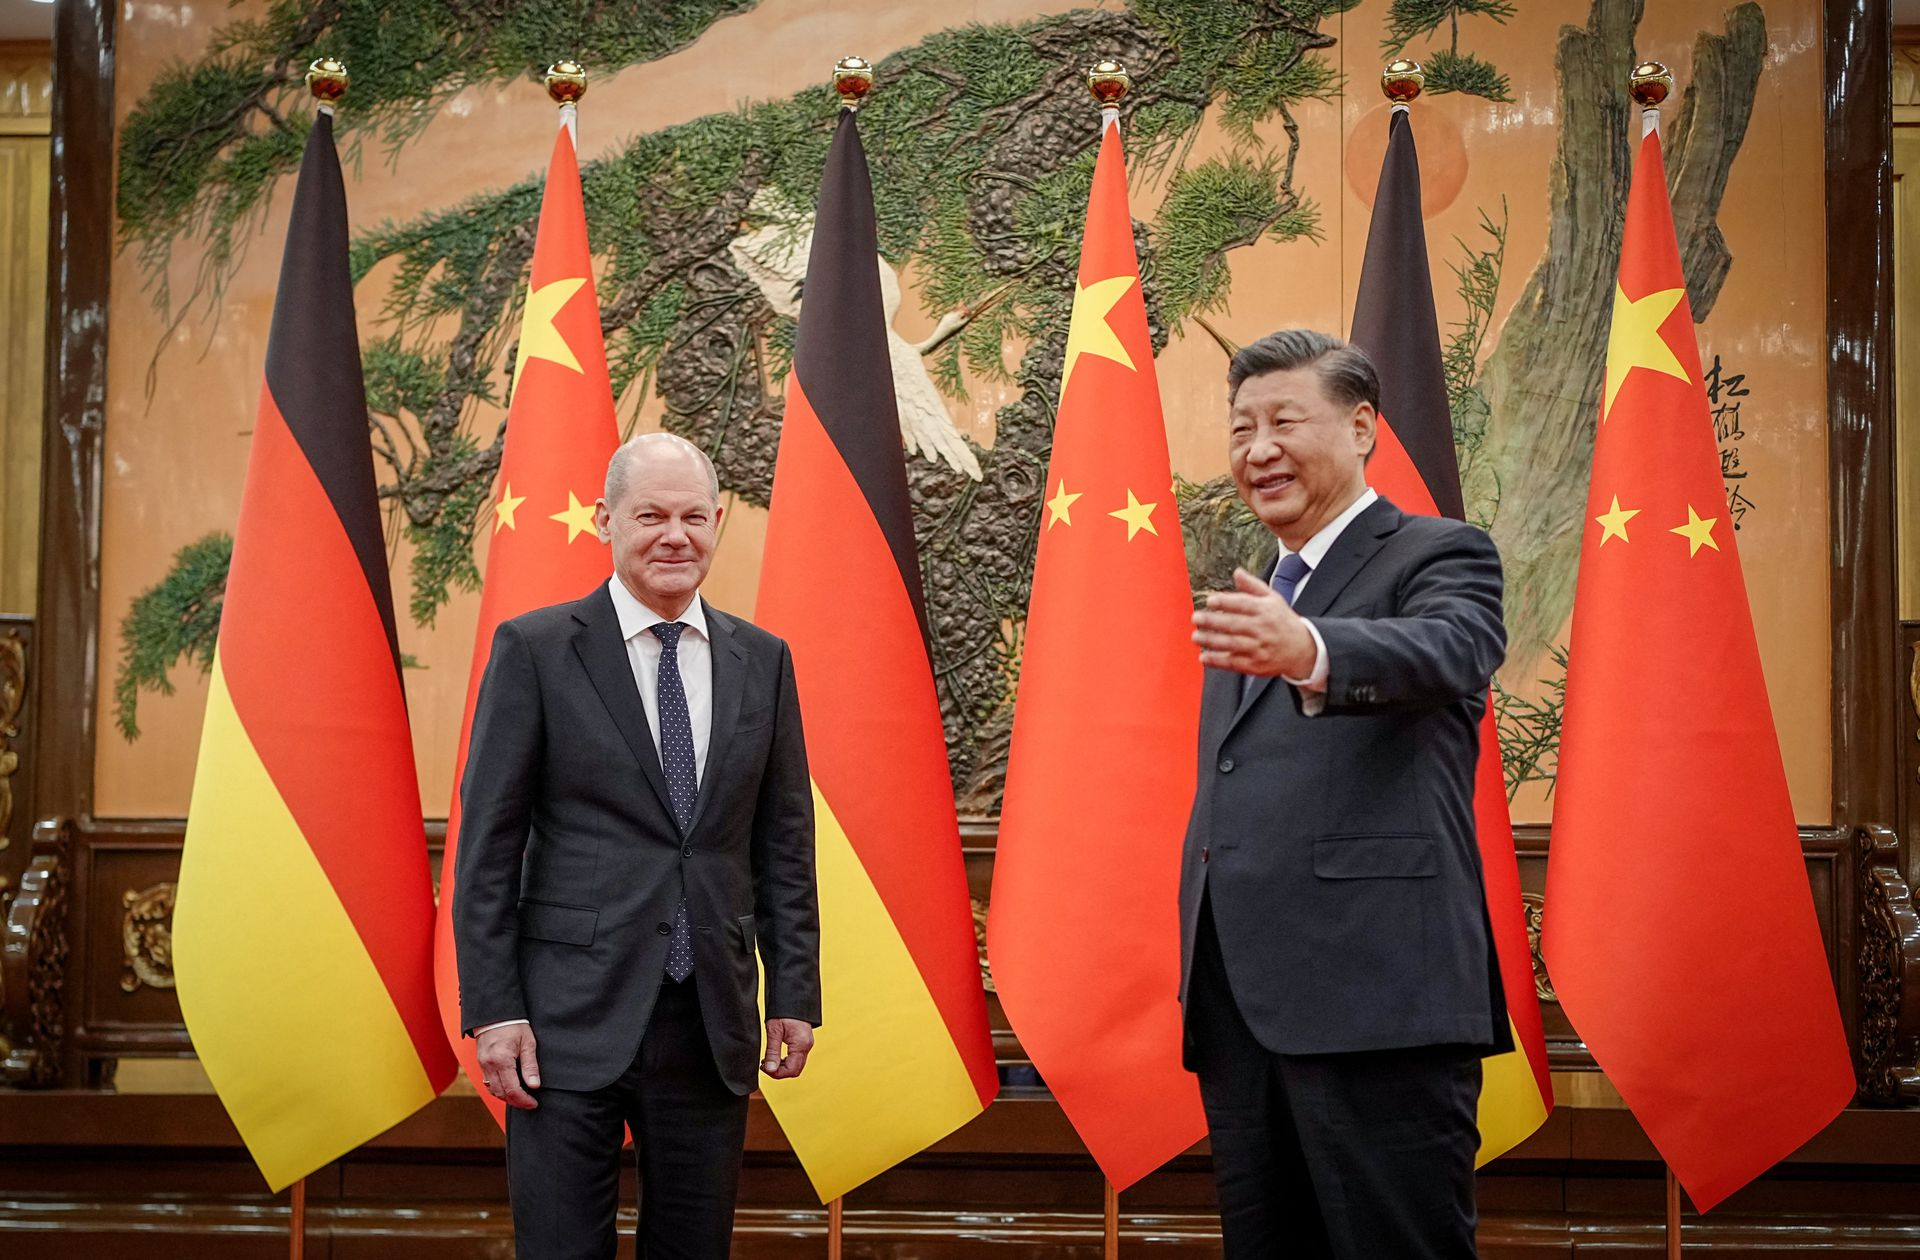 German Chancellor Olaf Scholz and Chinese President Xi Jinping in Beijing on Nov 4